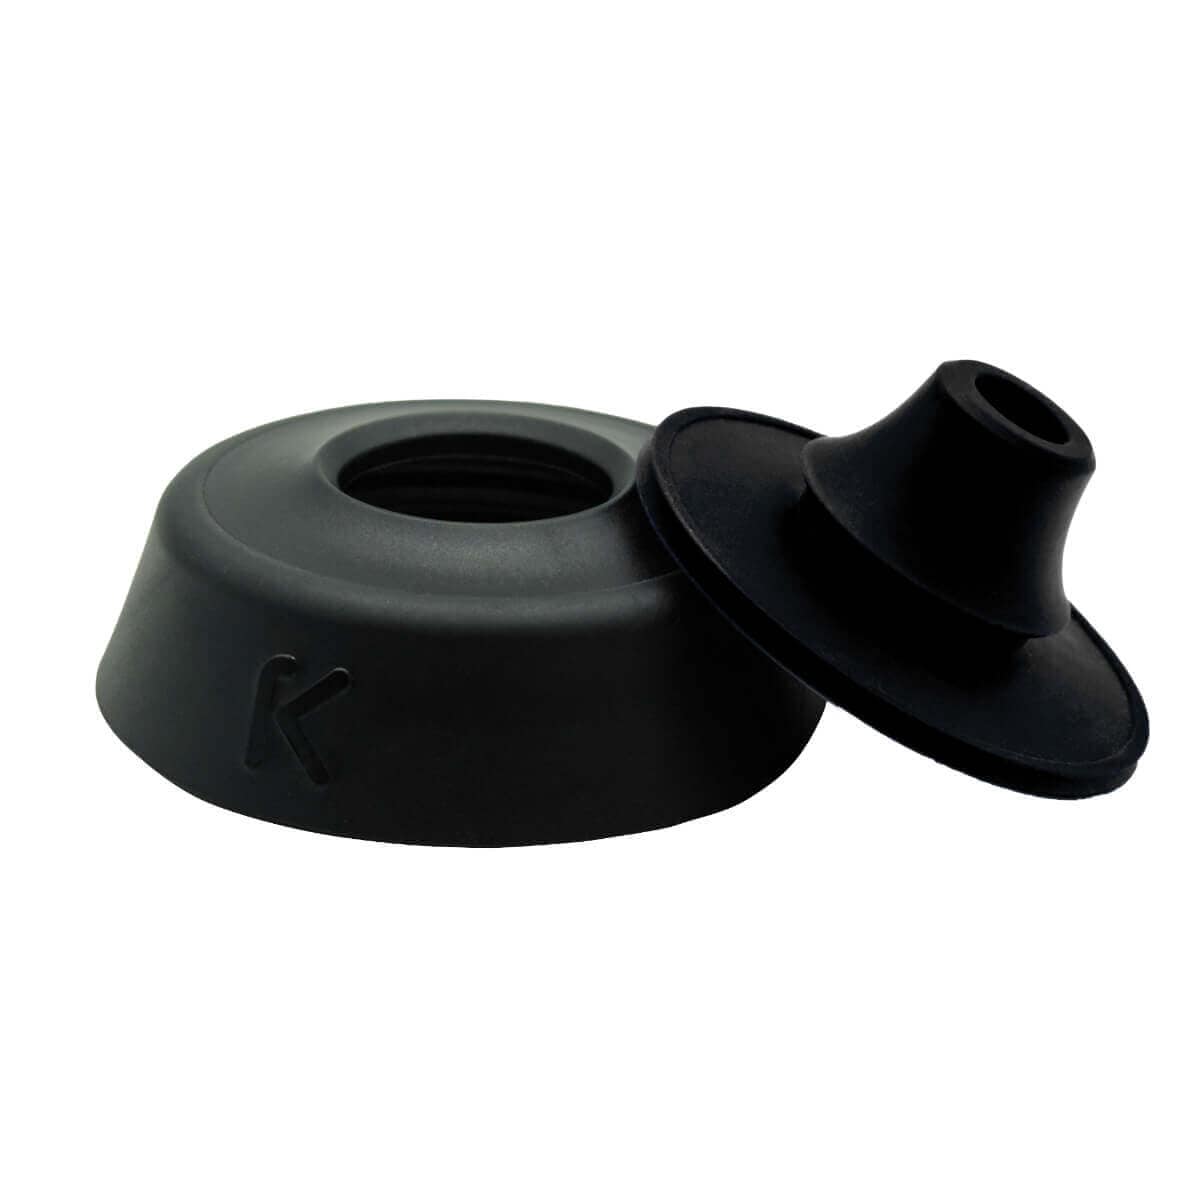 Black EasyClean two-piece cap disassembled